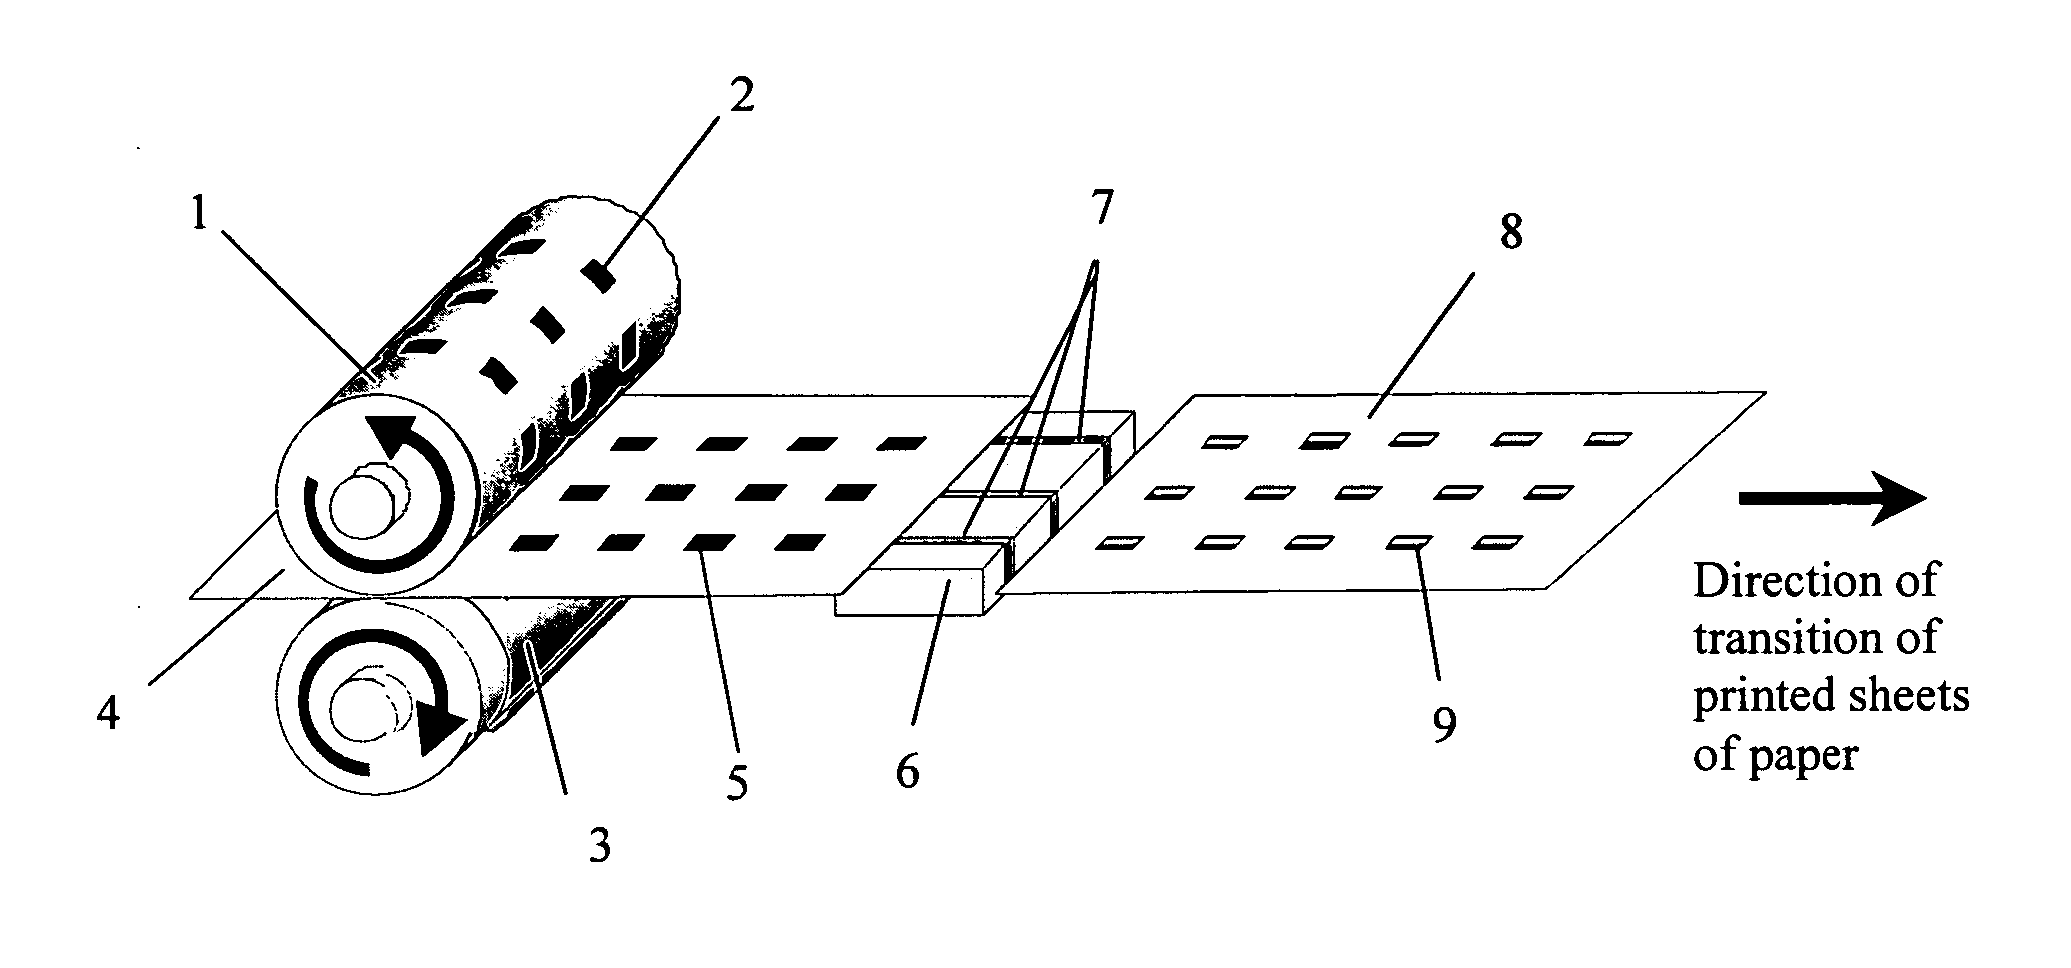 Alignment of paste-like ink having magnetic particles therein, and the printing of optical effects